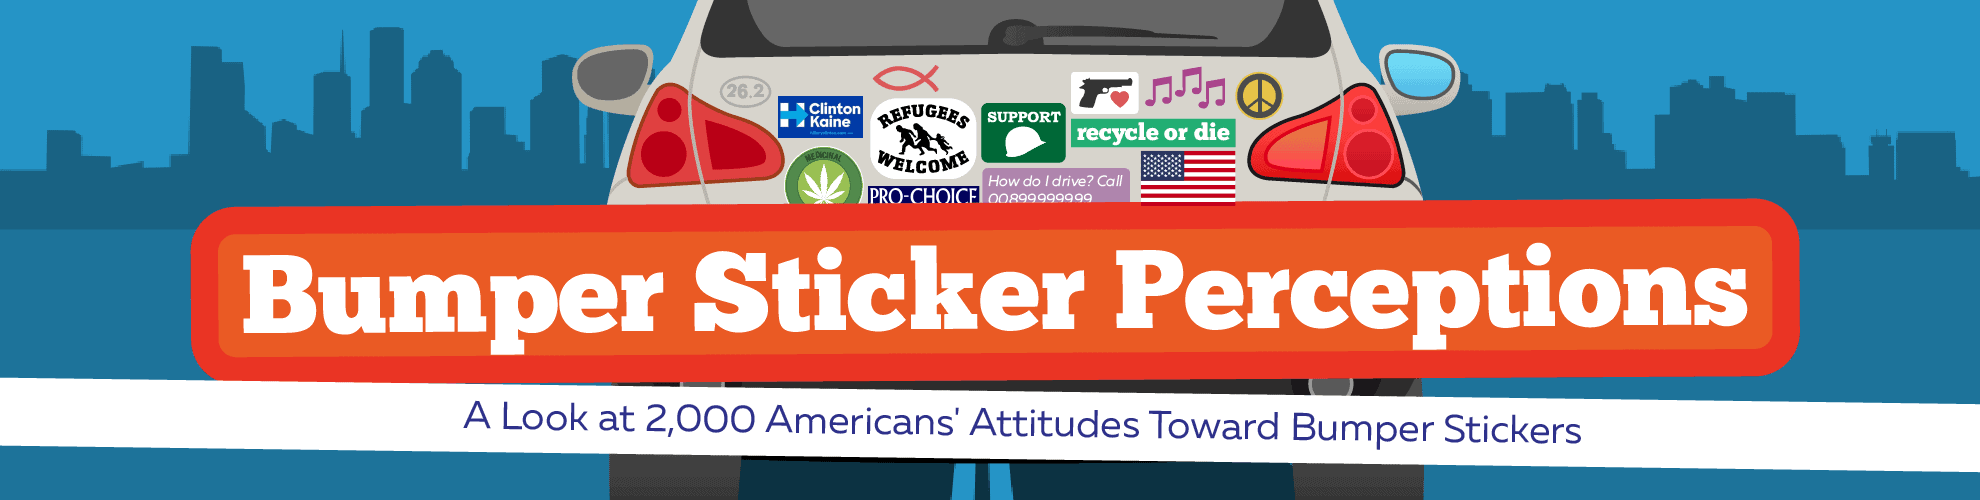 CH_Bumber Stickers Perceptions-01